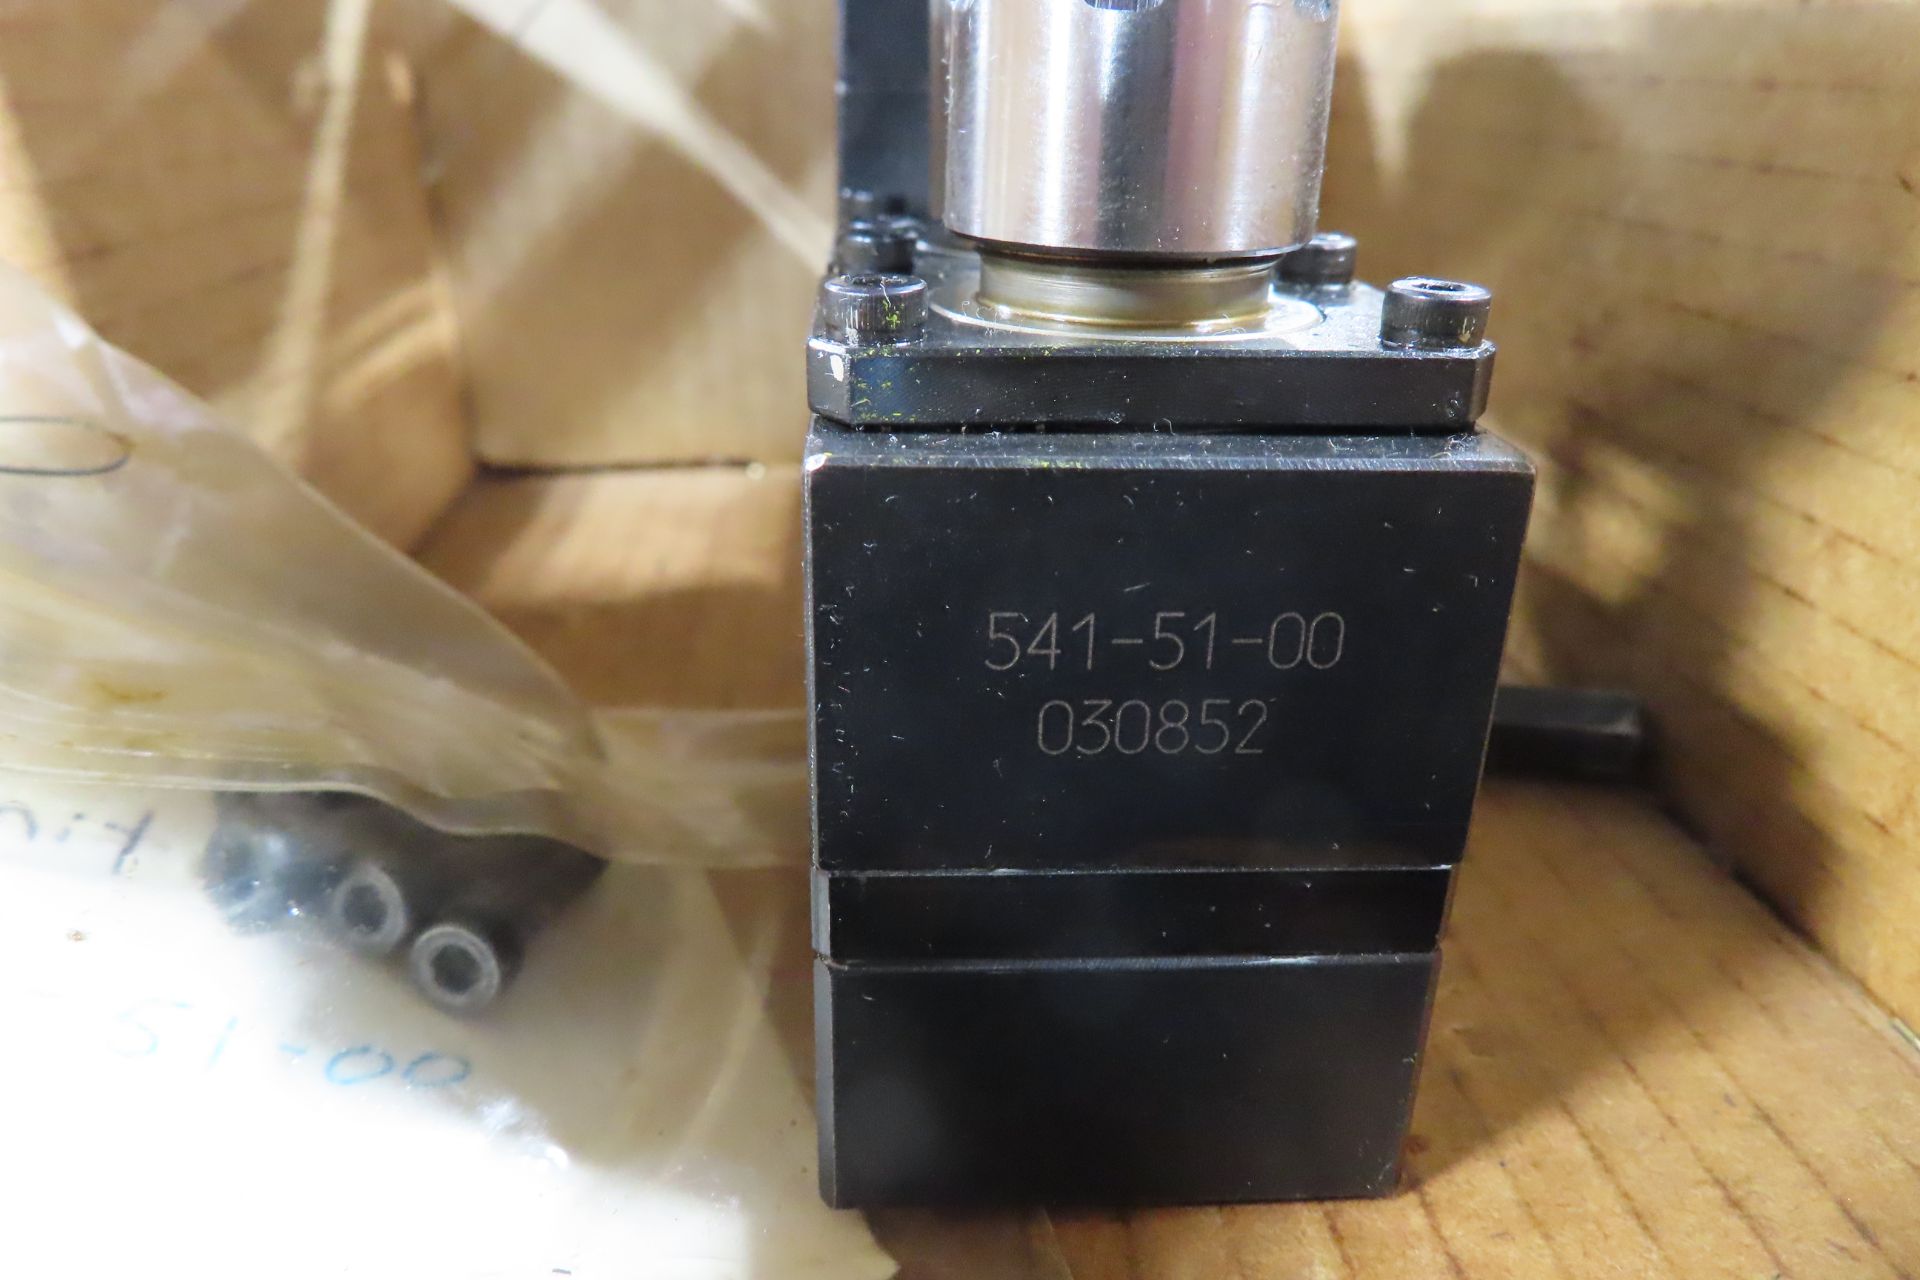 STAR 541-550-00, S/N 030852, 2 SPINDLE FRONT WORKING LIVE (DRILLING) TOOL - Image 4 of 6